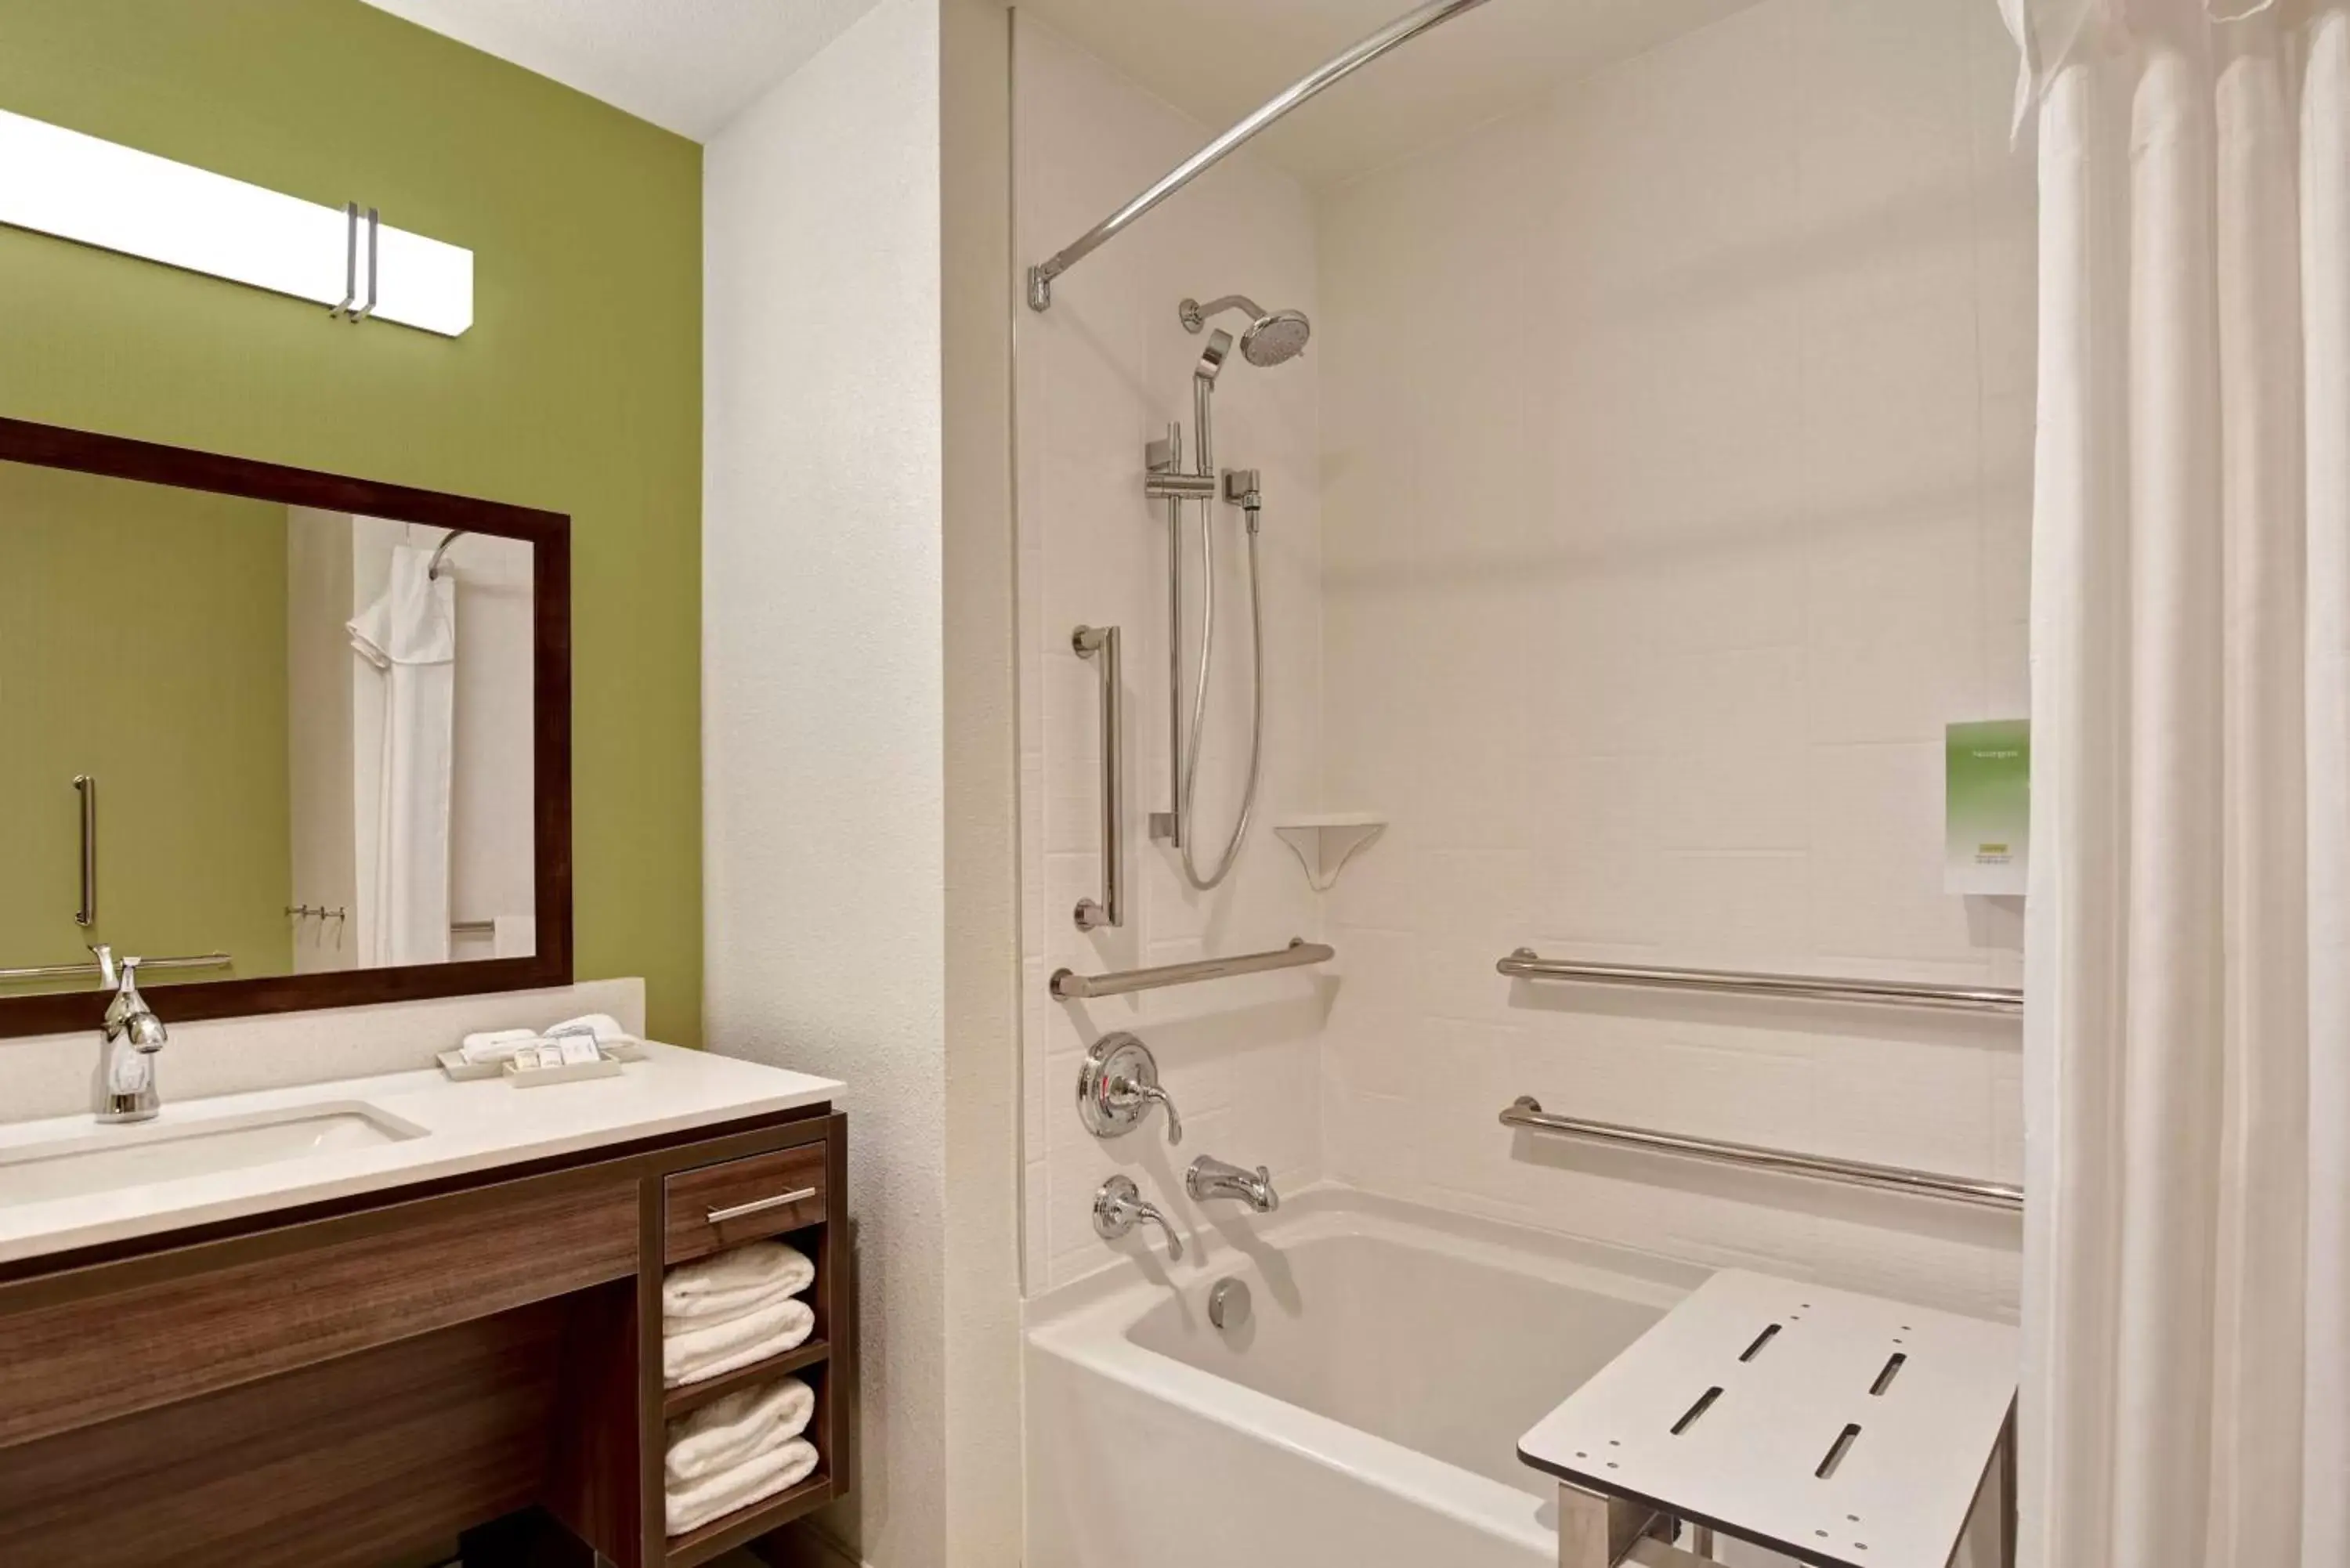 Bathroom in Home2Suites by Hilton Augusta